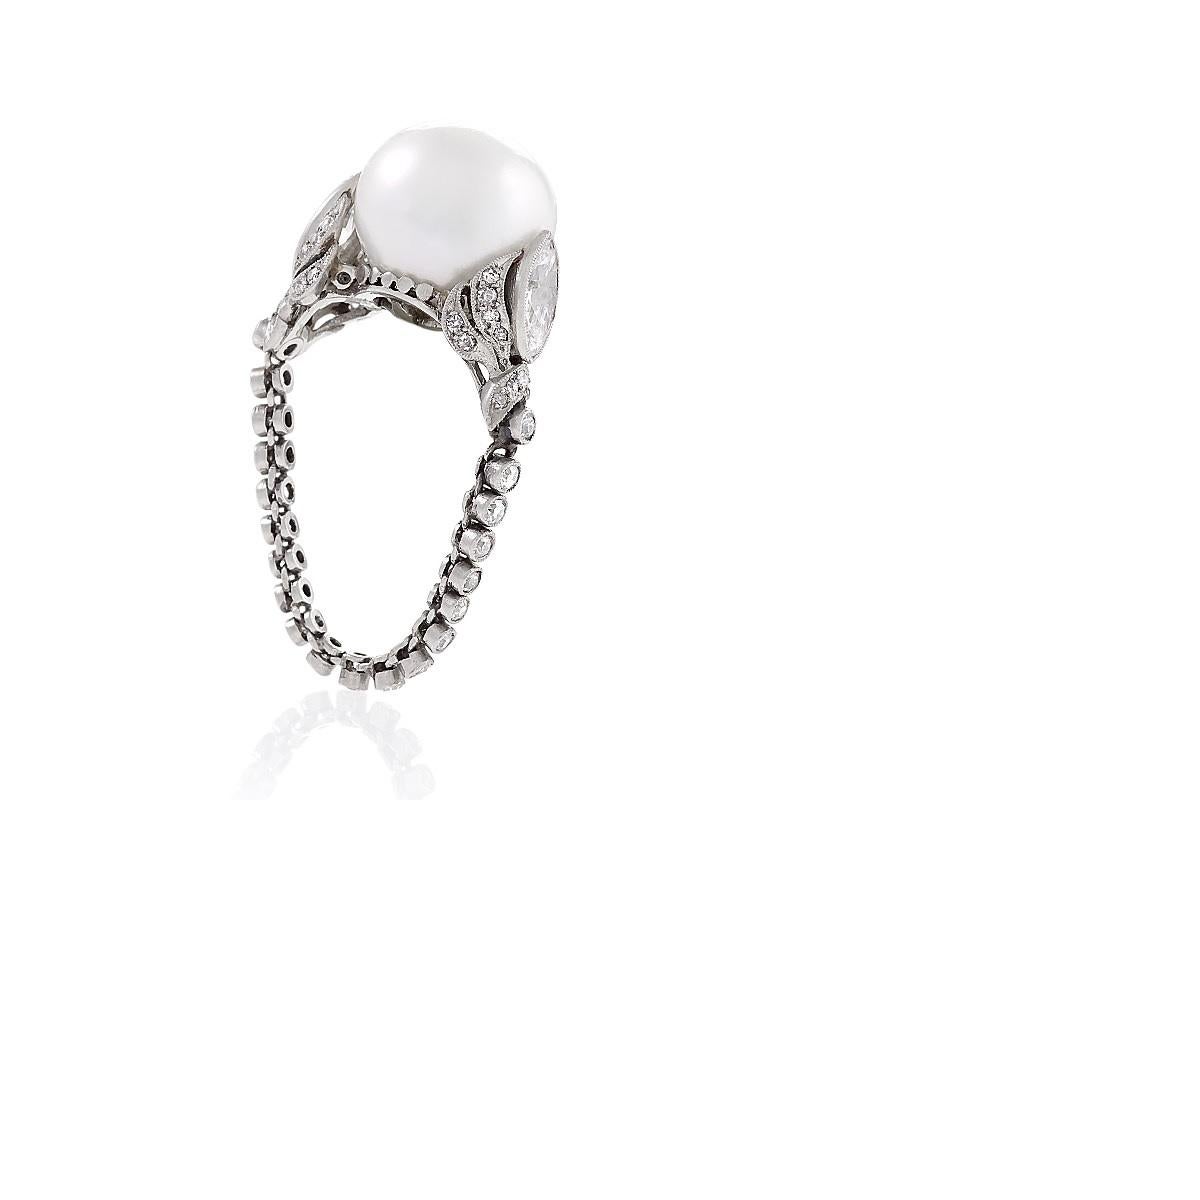 An Art Deco platinum ring with a baroque pearl and diamonds. The ring has 56 round diamonds with an approximate total weight of 0.60 carats and 2 marquise-cut diamonds with an approximate total weight of 1.00 carats. The baroque pearl mounted in the